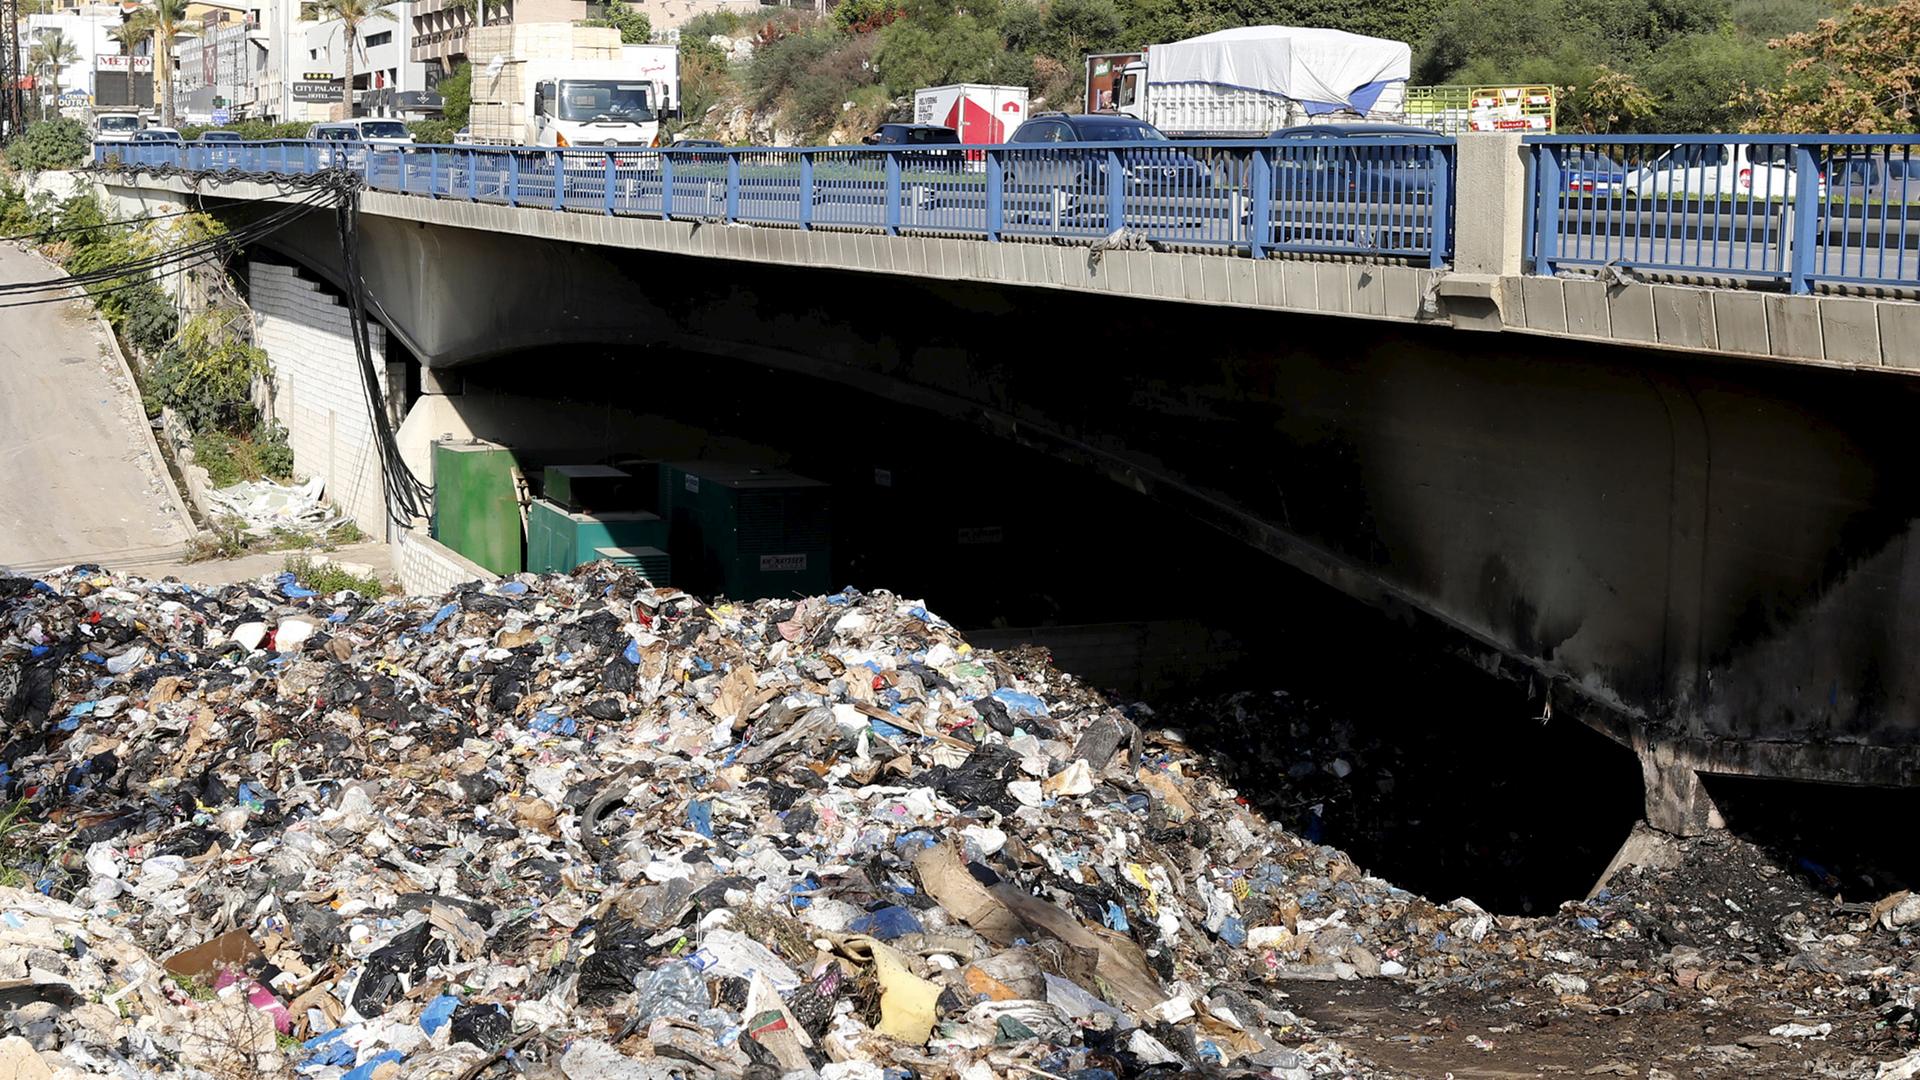 Garbage piles up in a riverbed near Beirut in late 2015. The region's almost year-long trash crisis prompted a political crisis, but also the emergence of nascent recycling programs.